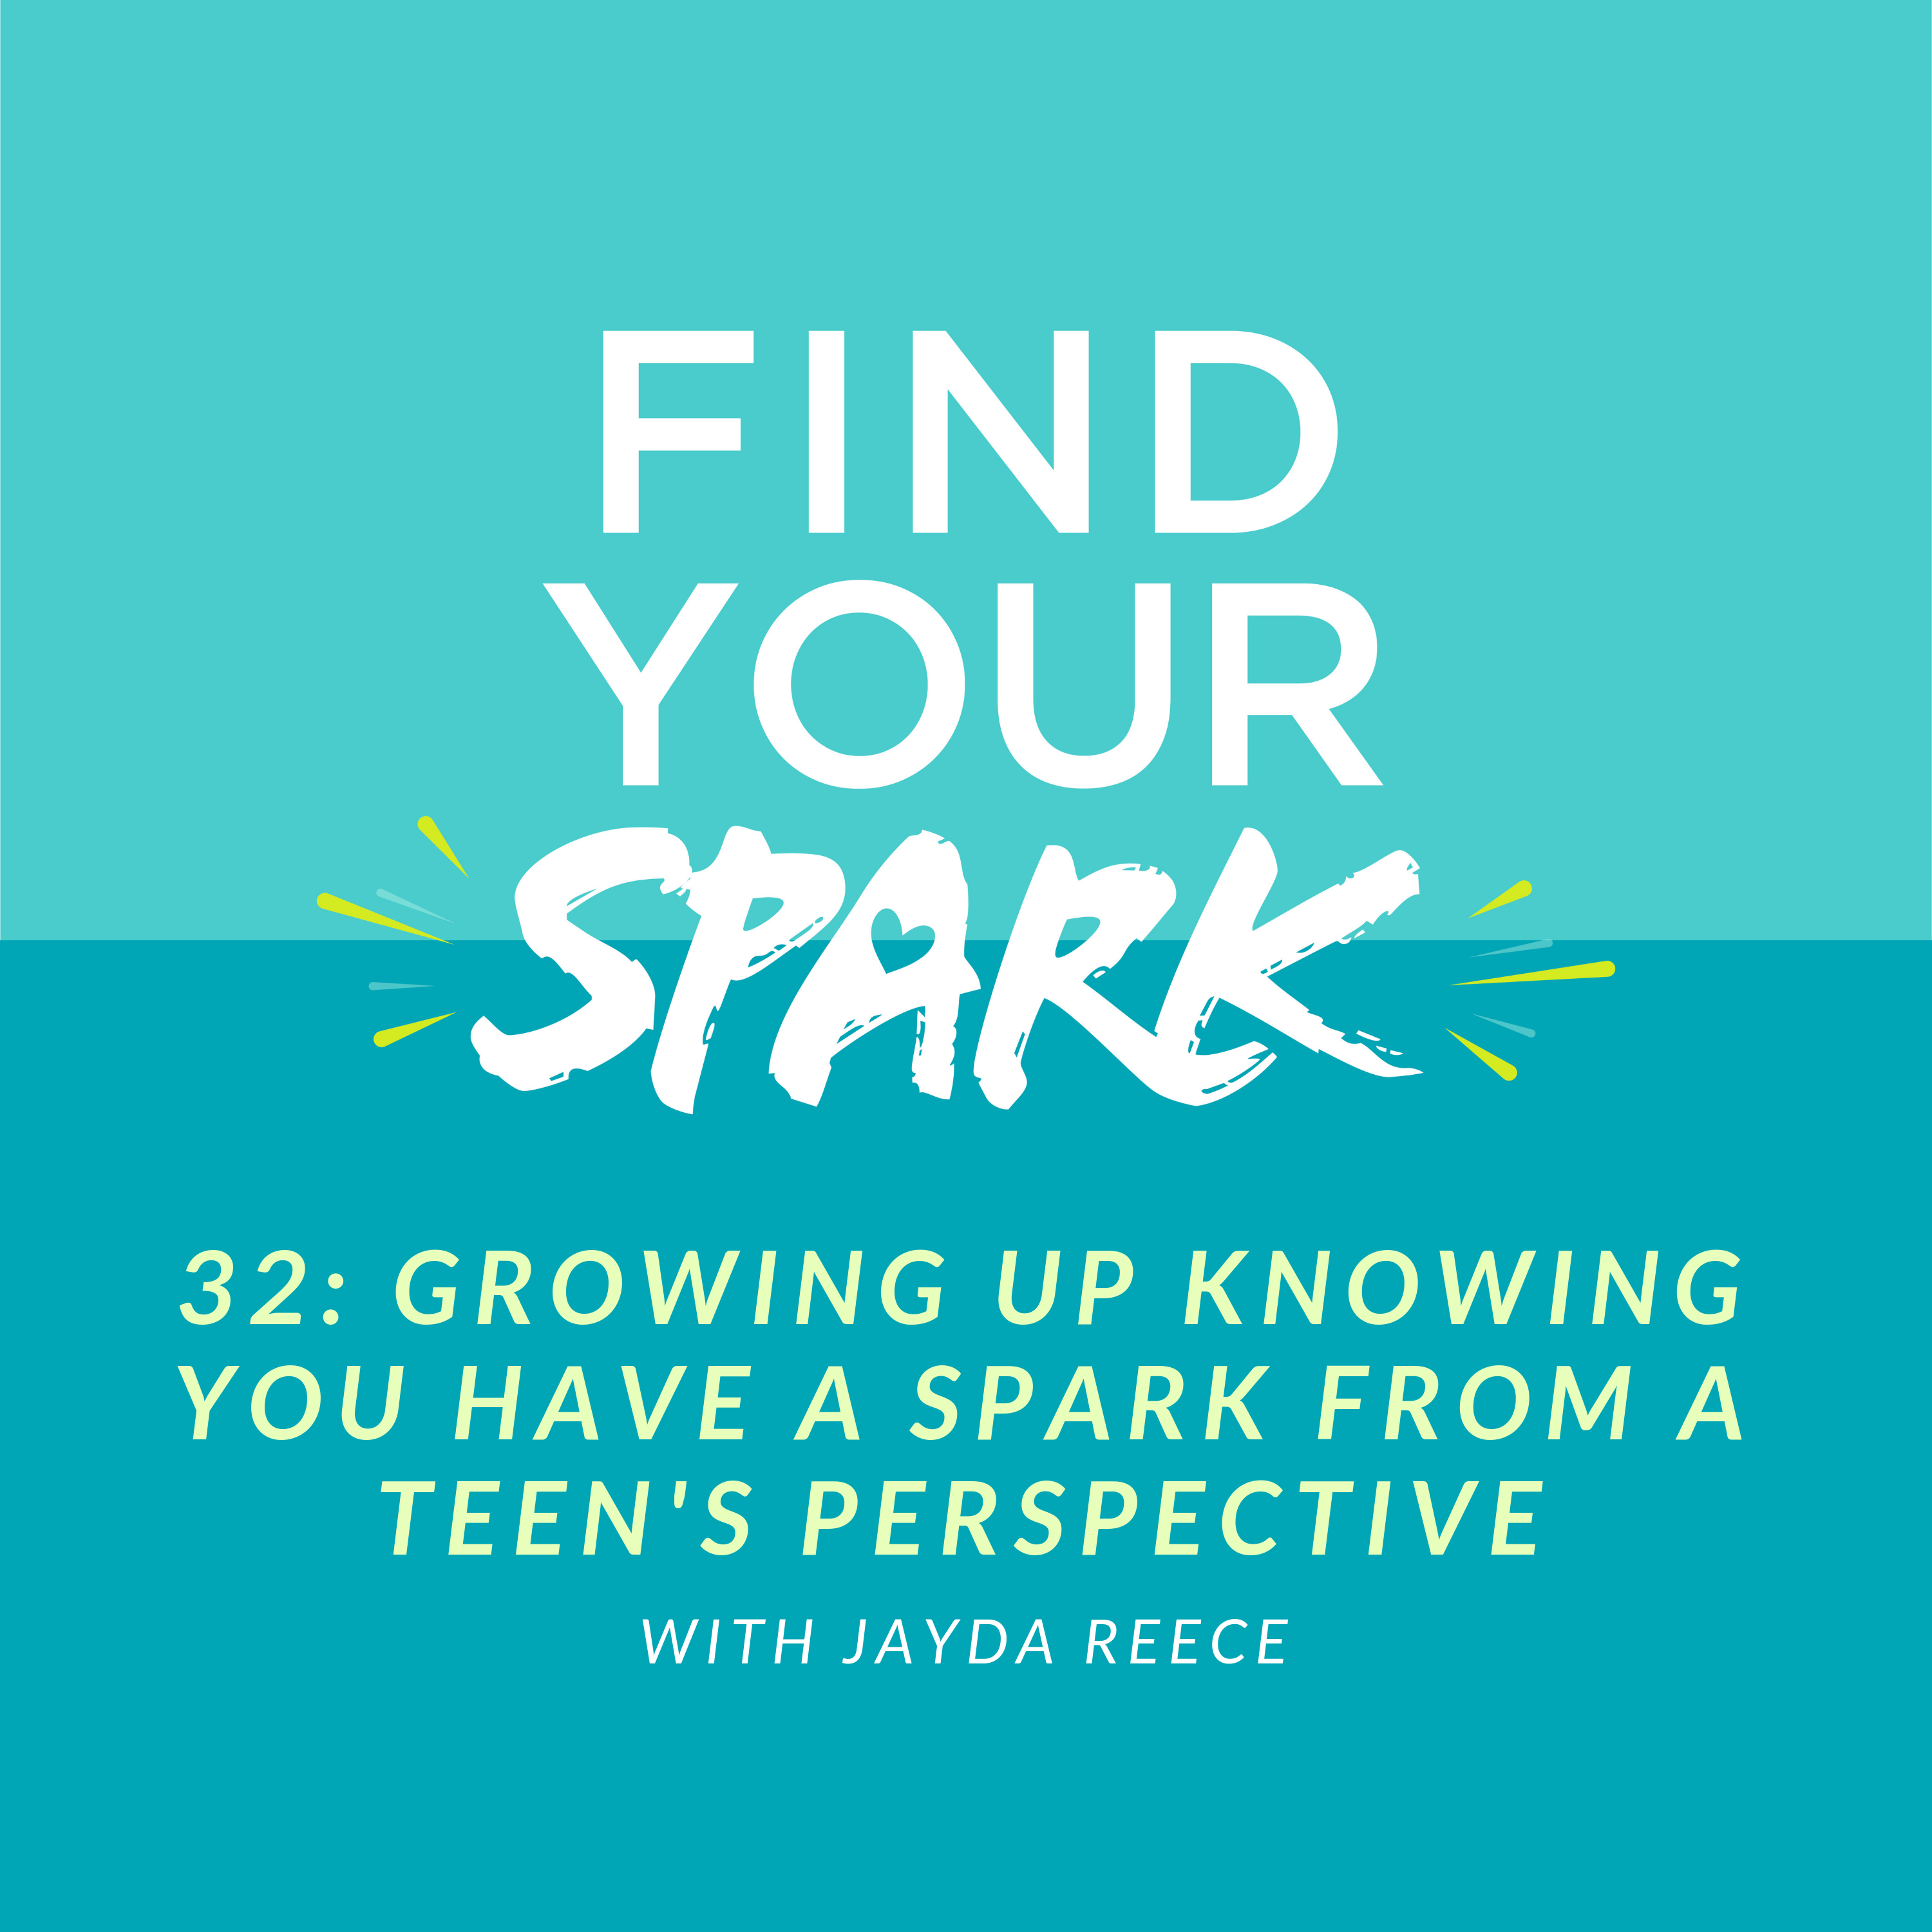 32: Growing Up Knowing You Have a SPARK from a Teen's Perspective